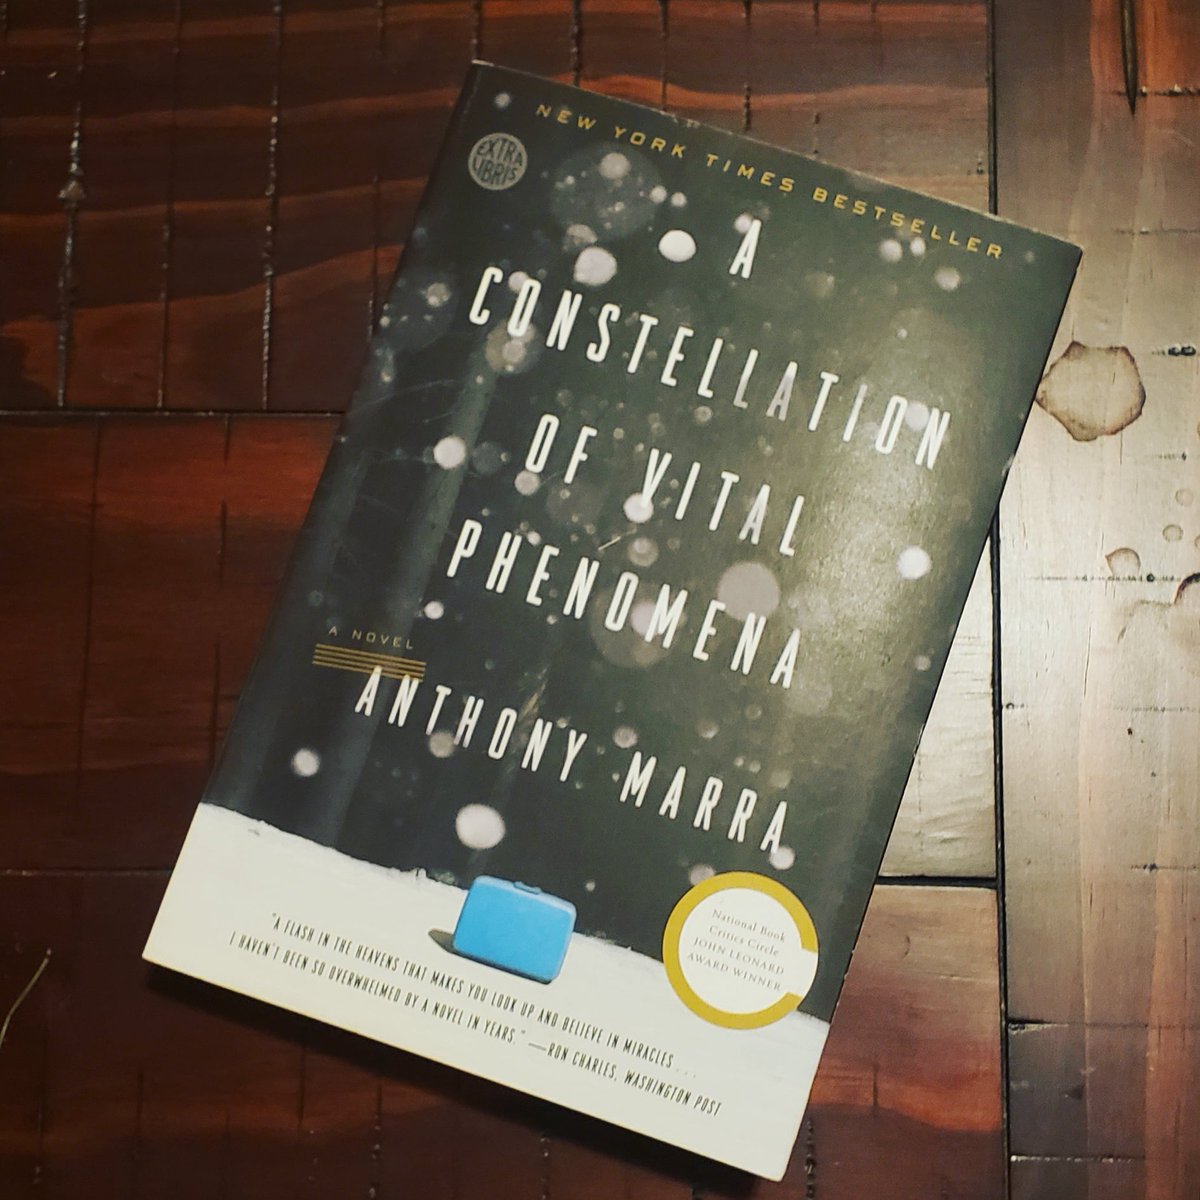 My friend Roseanna lent me A Constellation of Vital Phenomena by  @anthonyfmarra, and I told her I wouldn't get to it for a while. Then I devoured it in a weekend. It's brilliant. It's also particularly haunting because ...